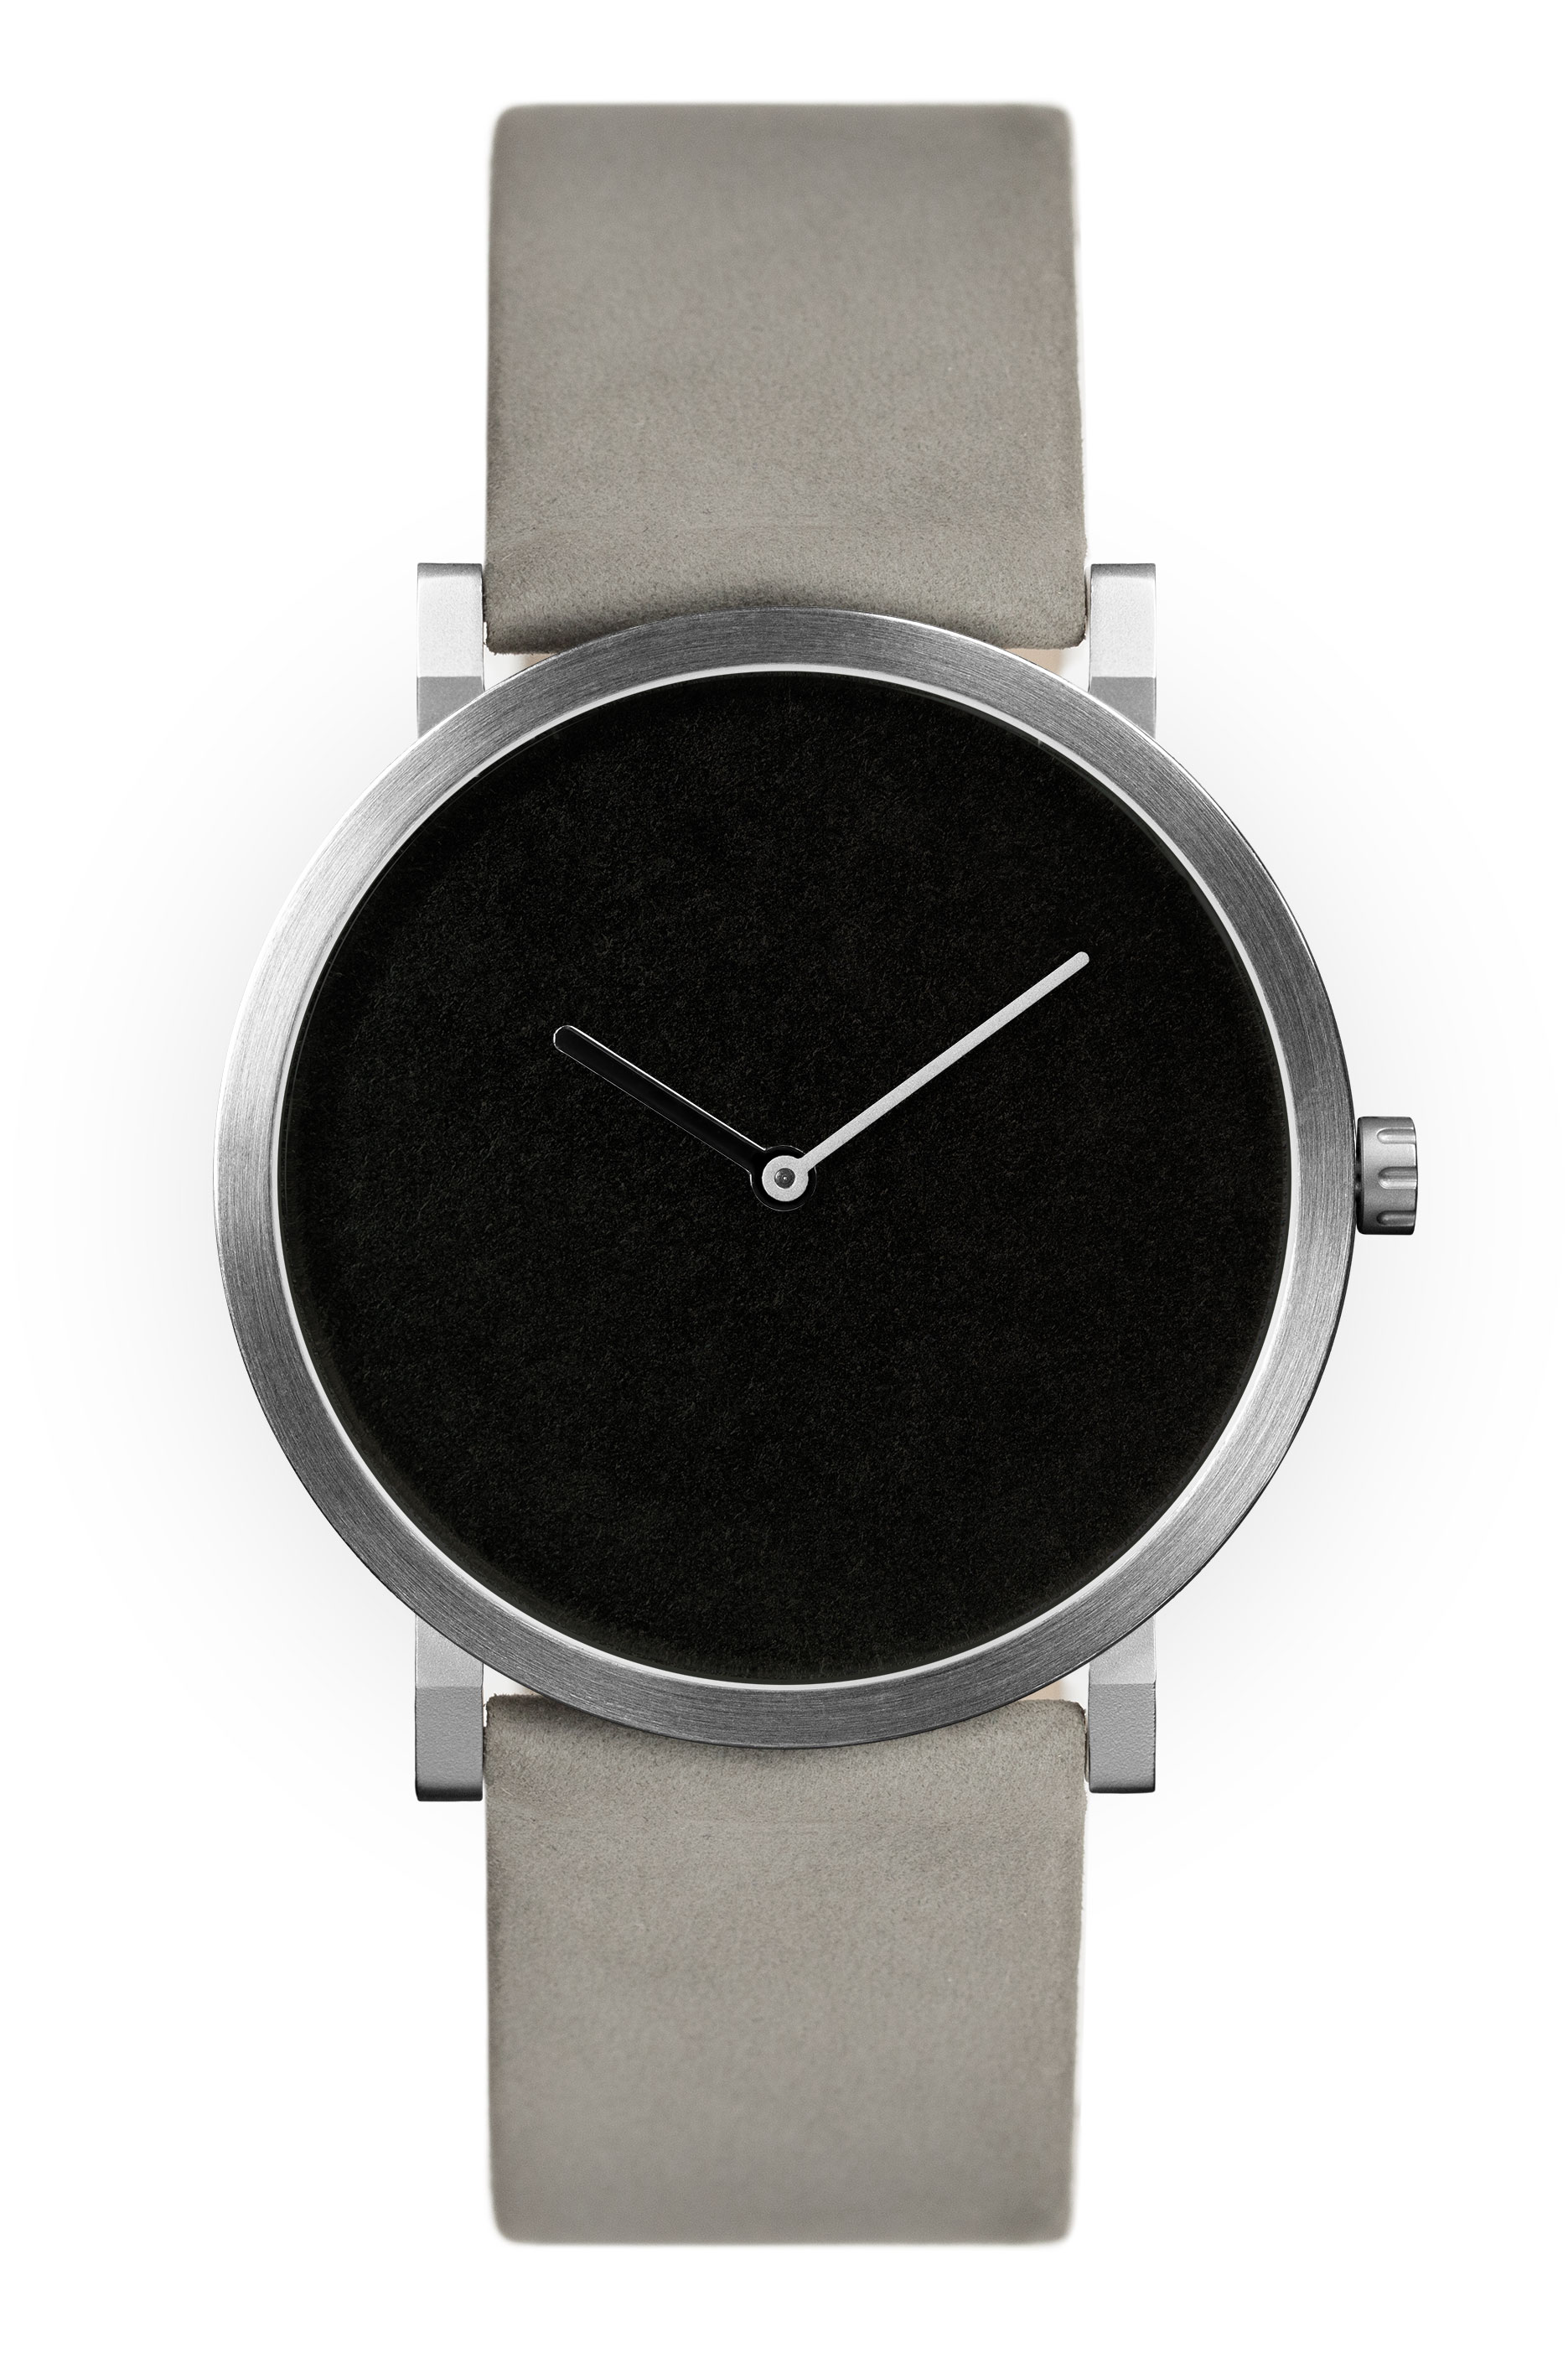 Matte Black with Beige Leather Strap